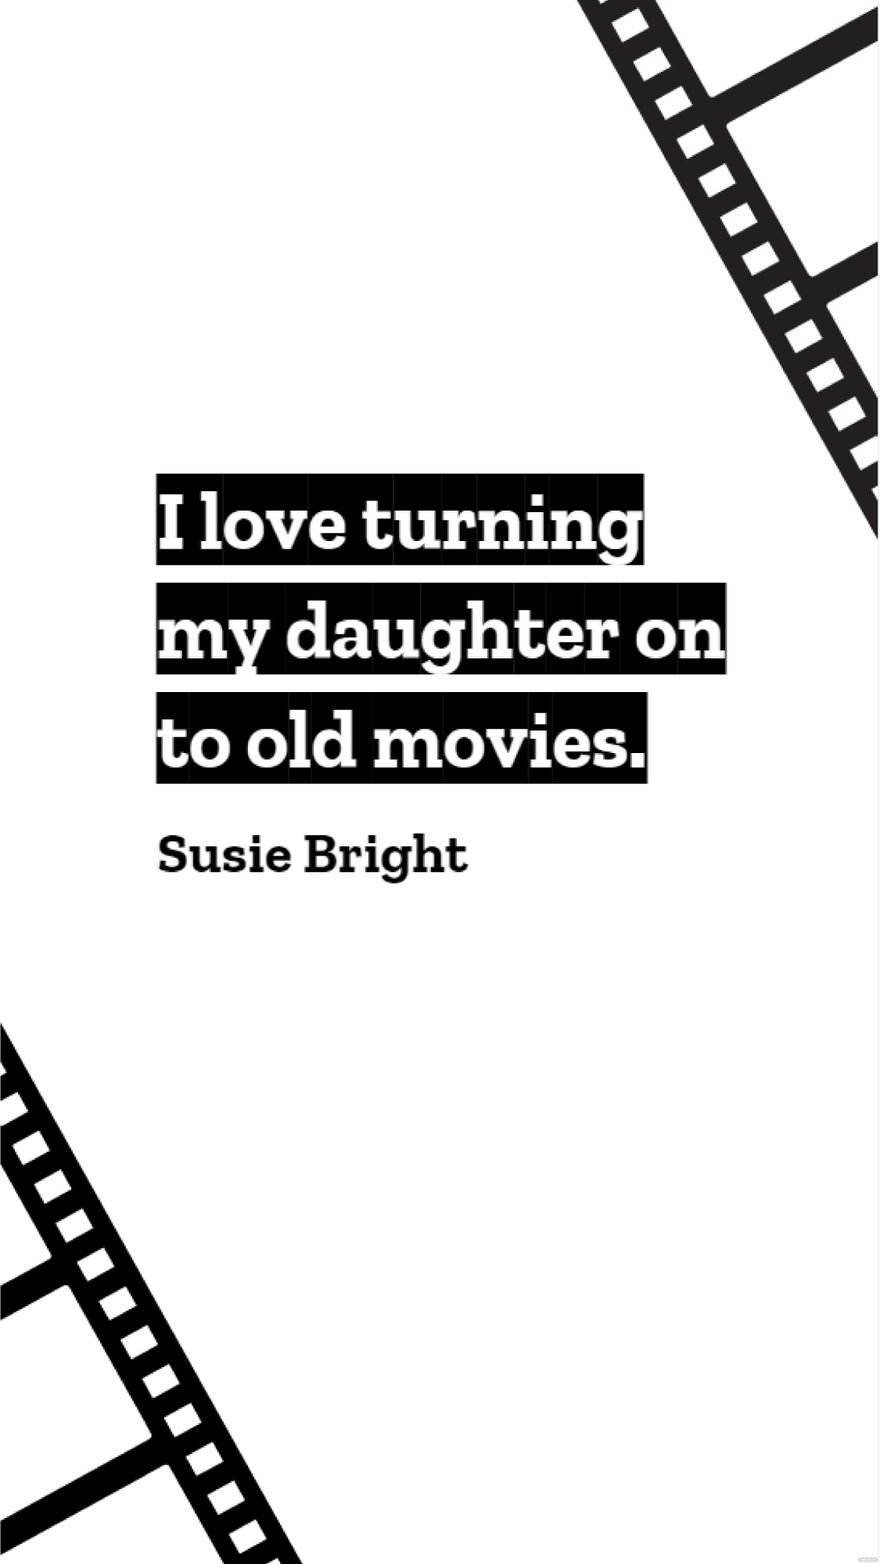 Free Susie Bright - I love turning my daughter on to old movies. in JPG